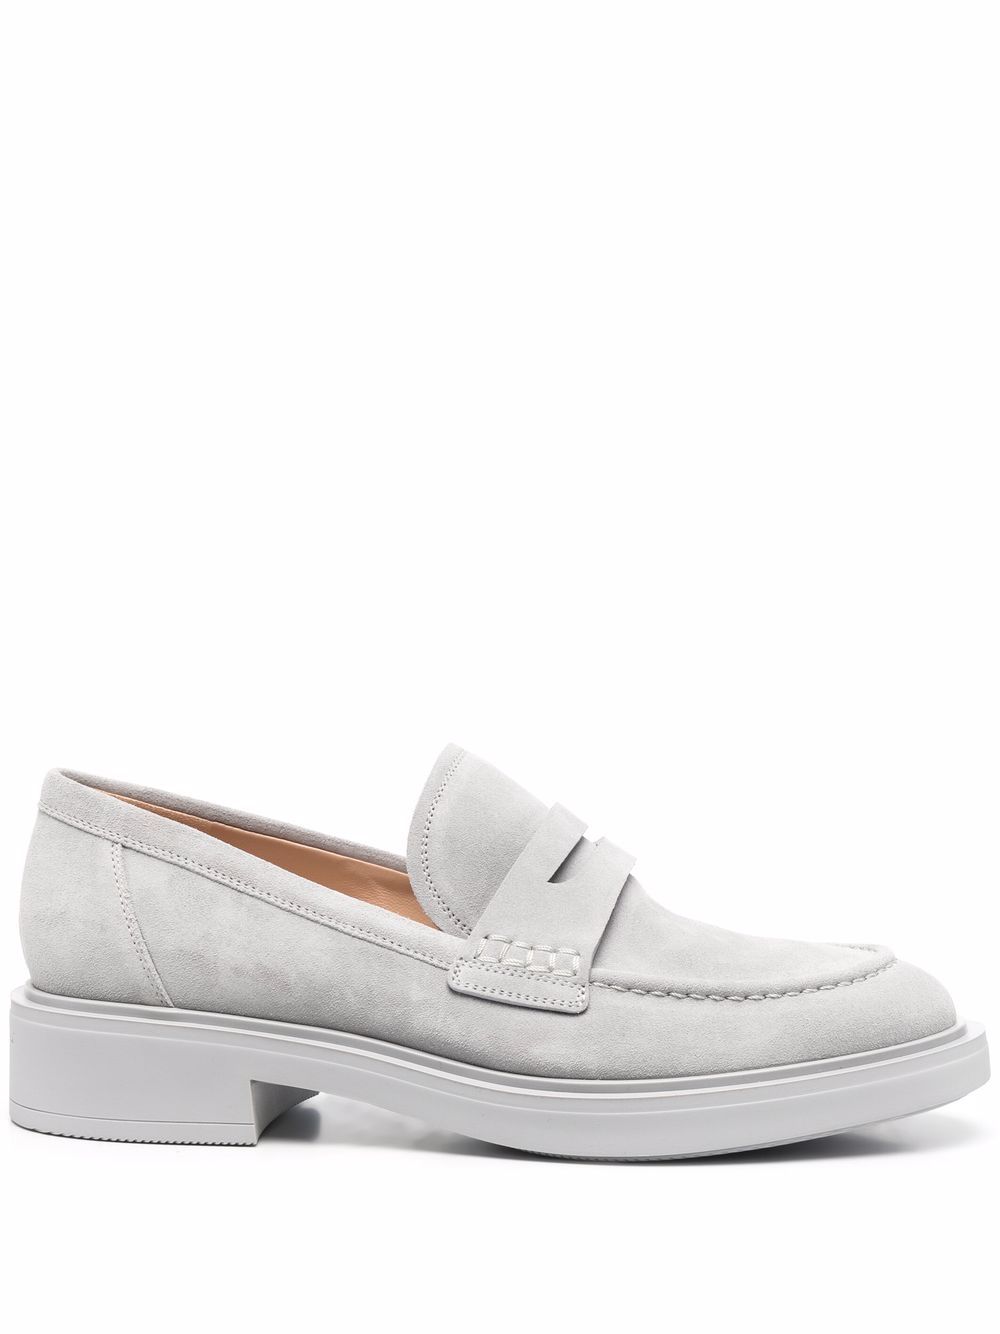 slip-on suede loafers